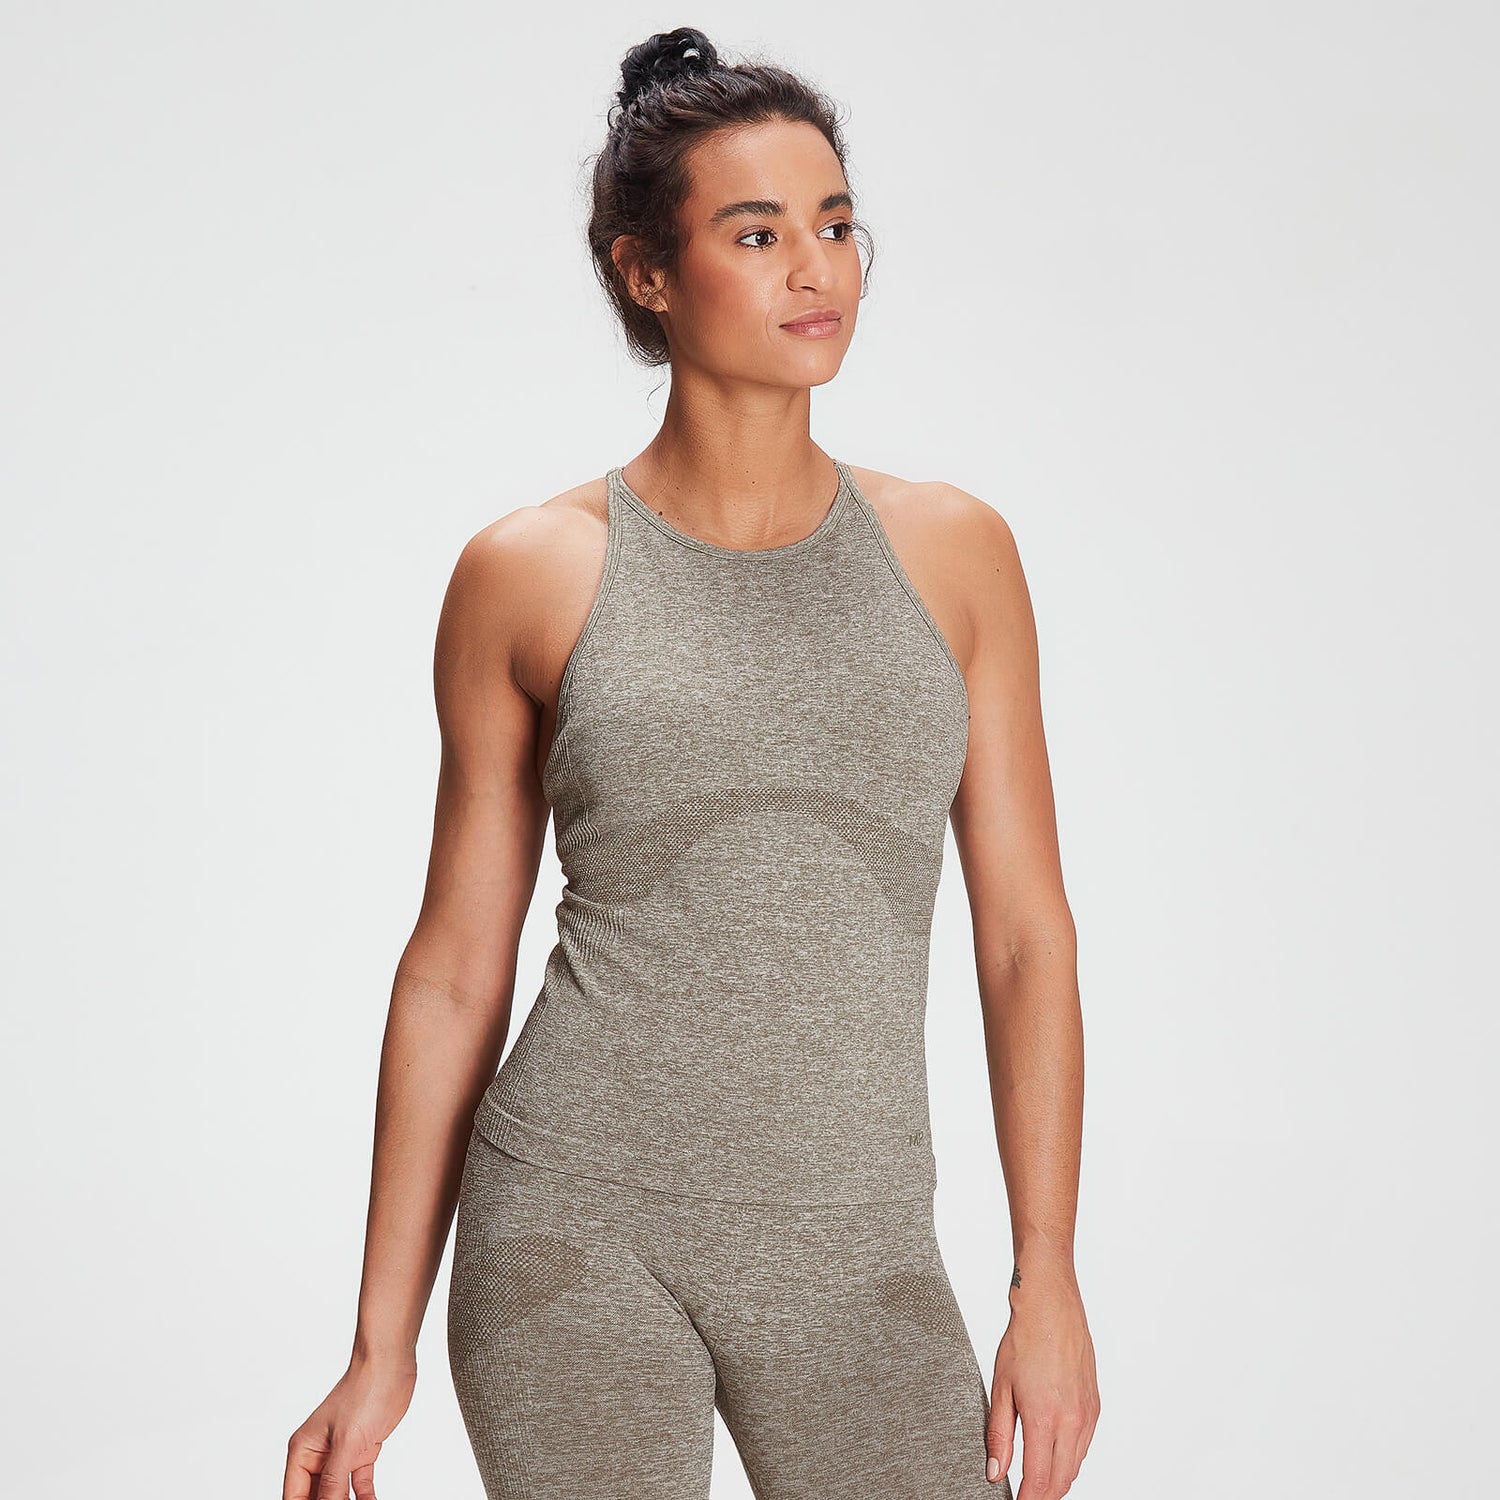 MP Women's Training Seamless Vest - Taupe - XS